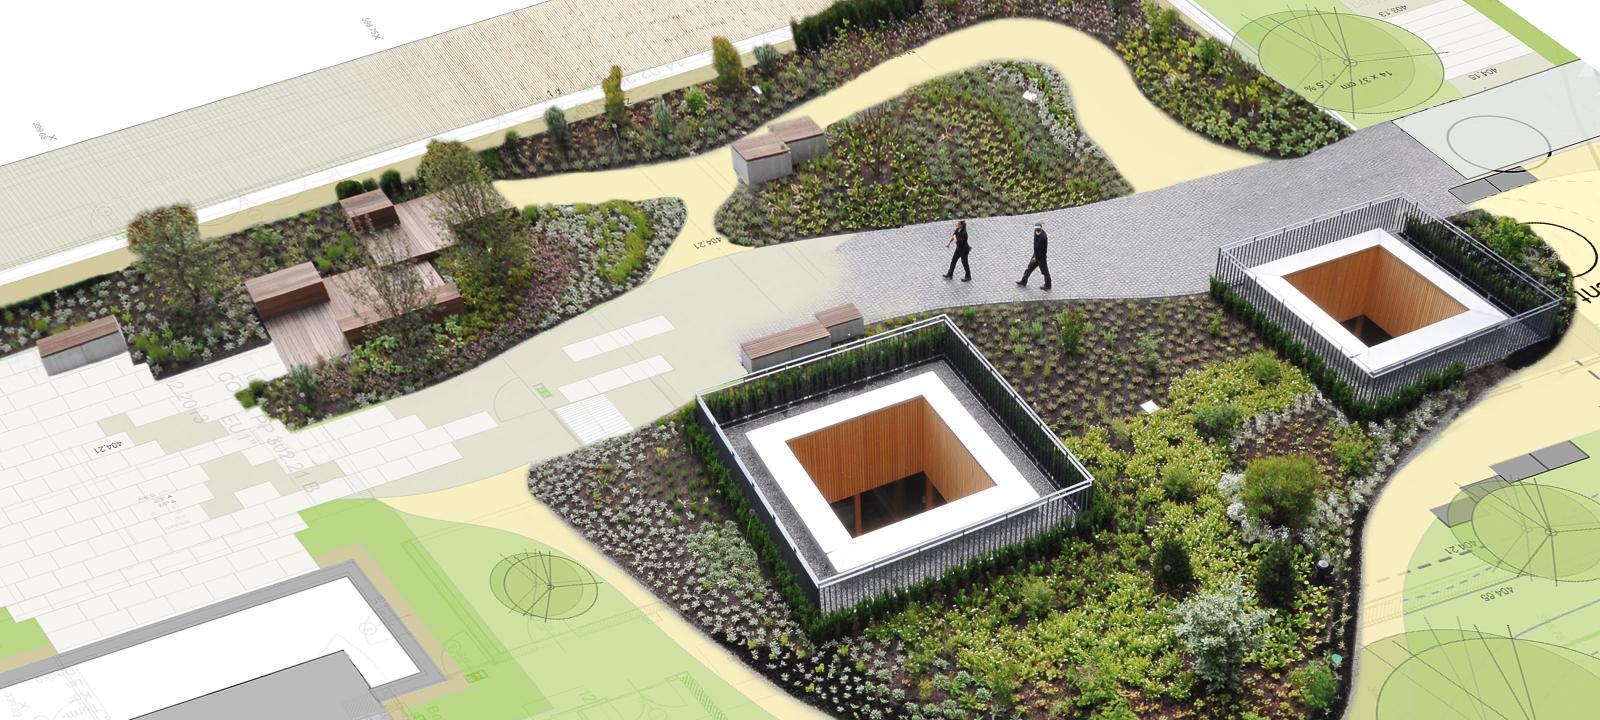 Architectural plan of a green roof